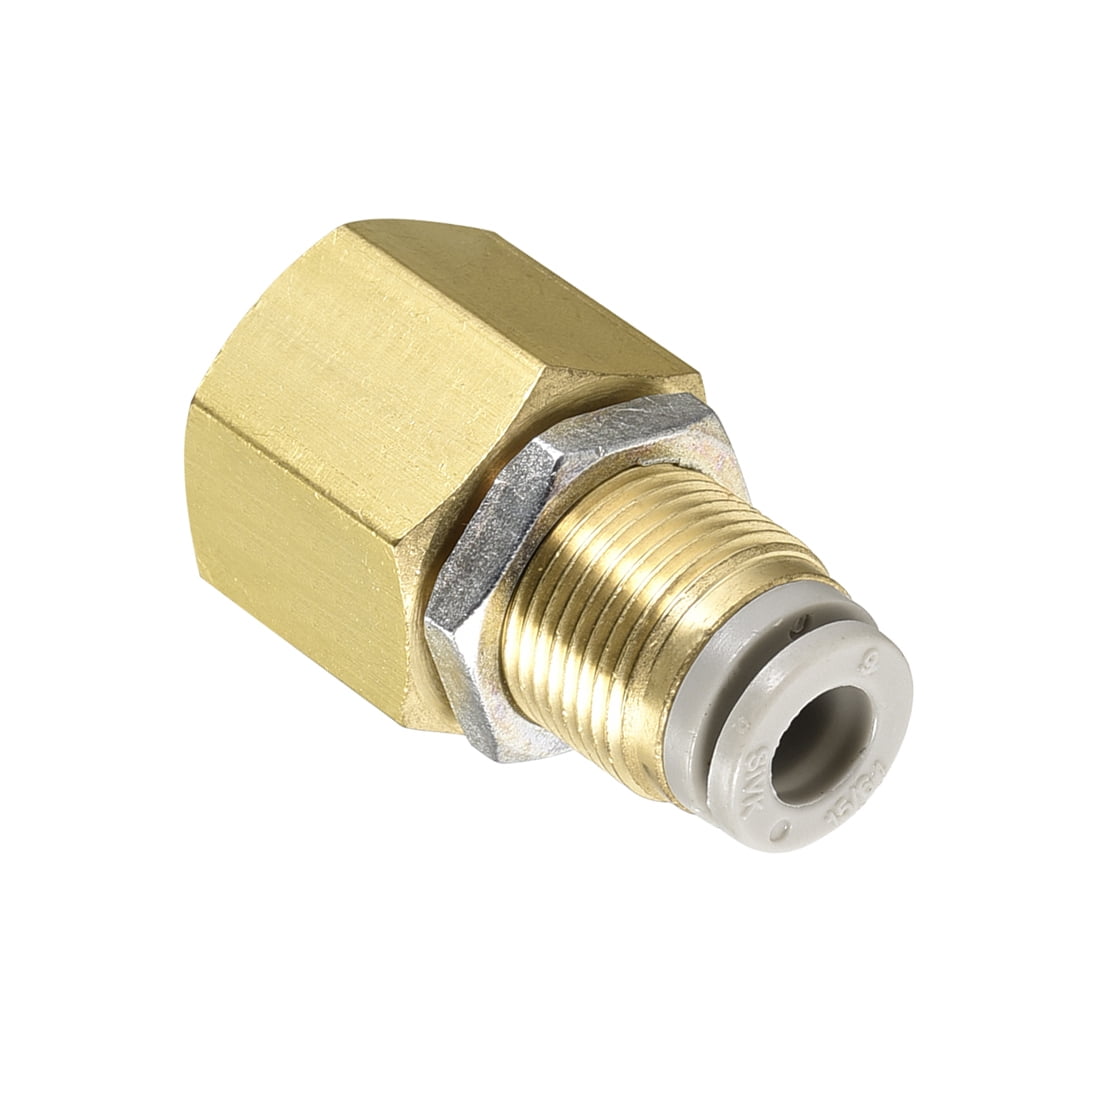 Details about   8mm Tube to 1/8PT Female Thread Bulkhead Push to Connect Fitting Copper 2Pcs 